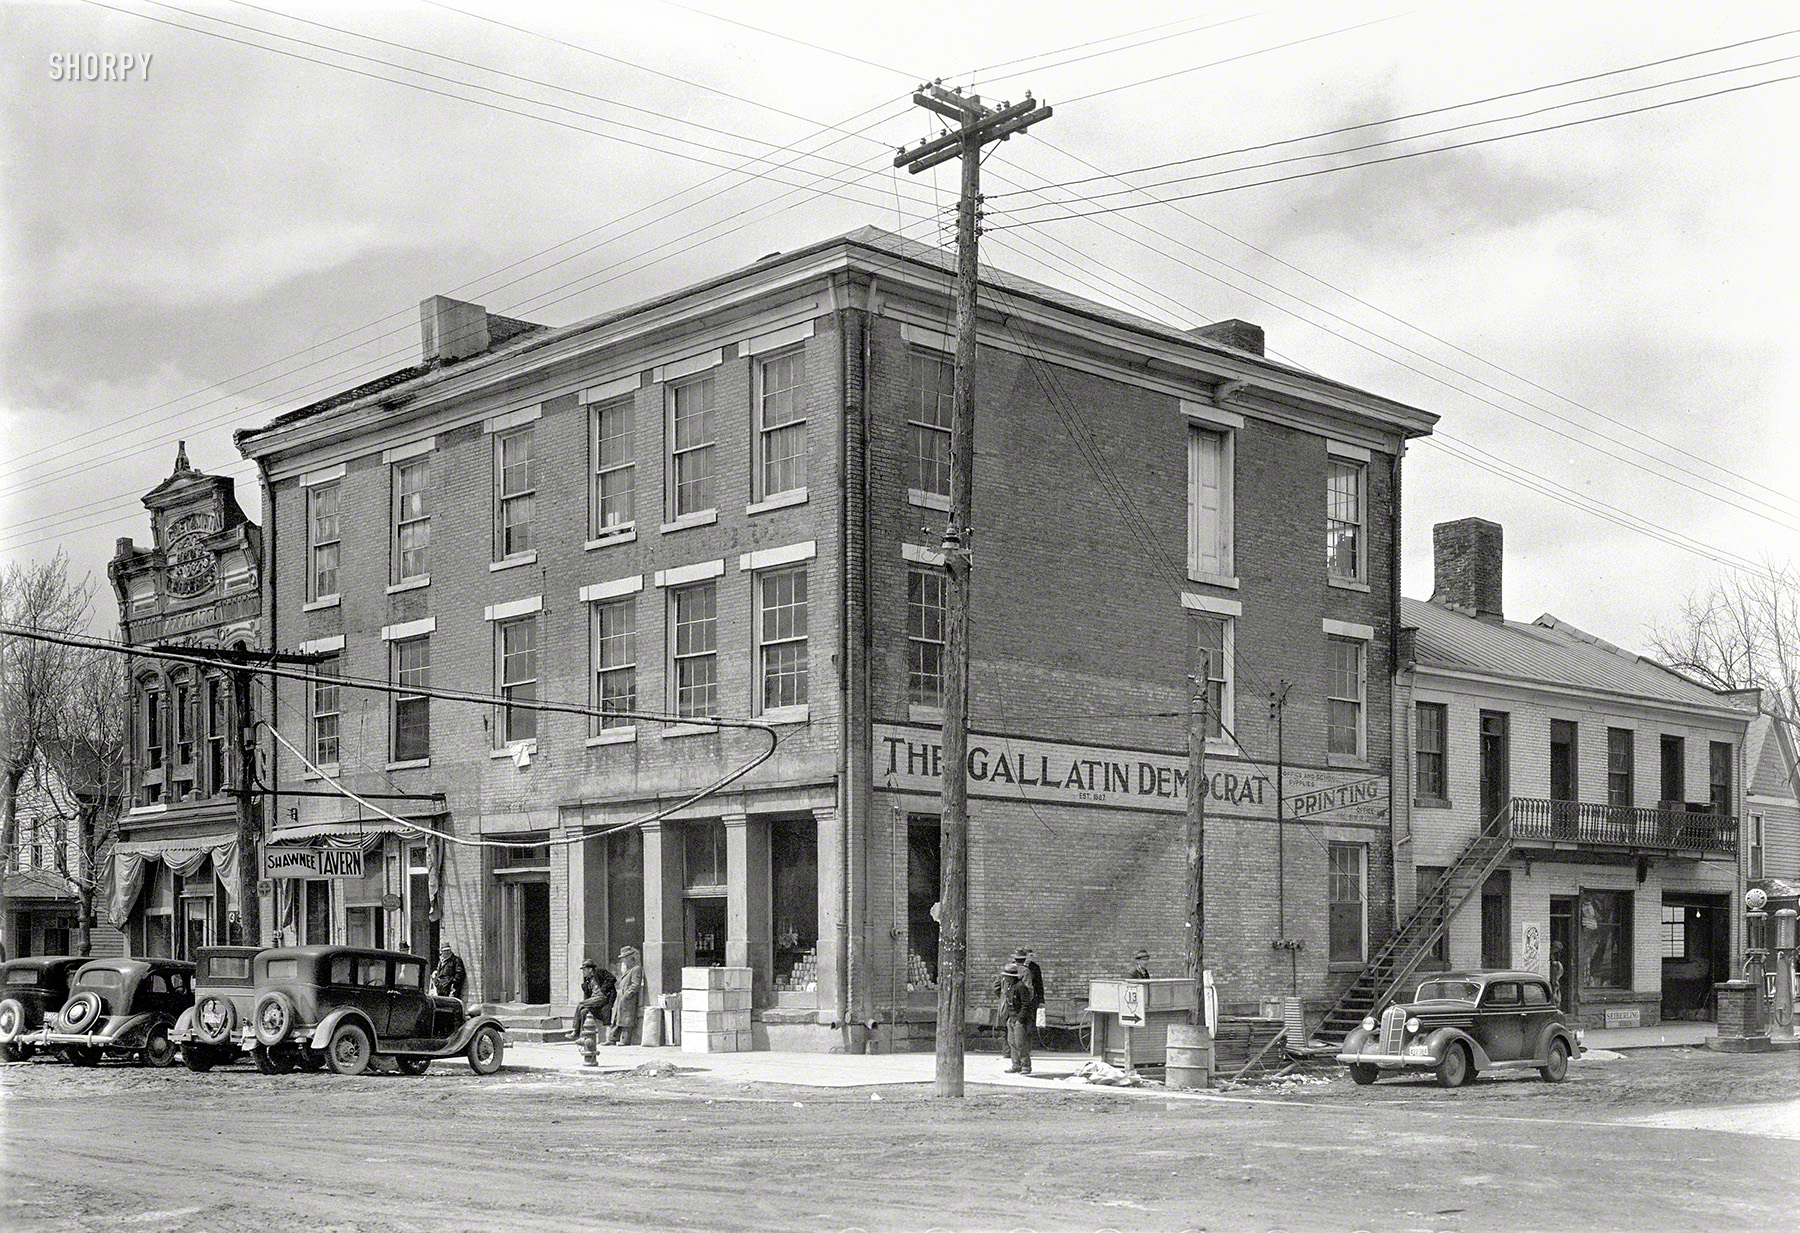 April 1937. "The Posey Building of Shawneetown, Illinois, in which Abraham Lincoln and Robert Ingersoll had law offices." Now home to a newspaper and a bar. Photo by Russell Lee for the Resettlement Administration. View full size.